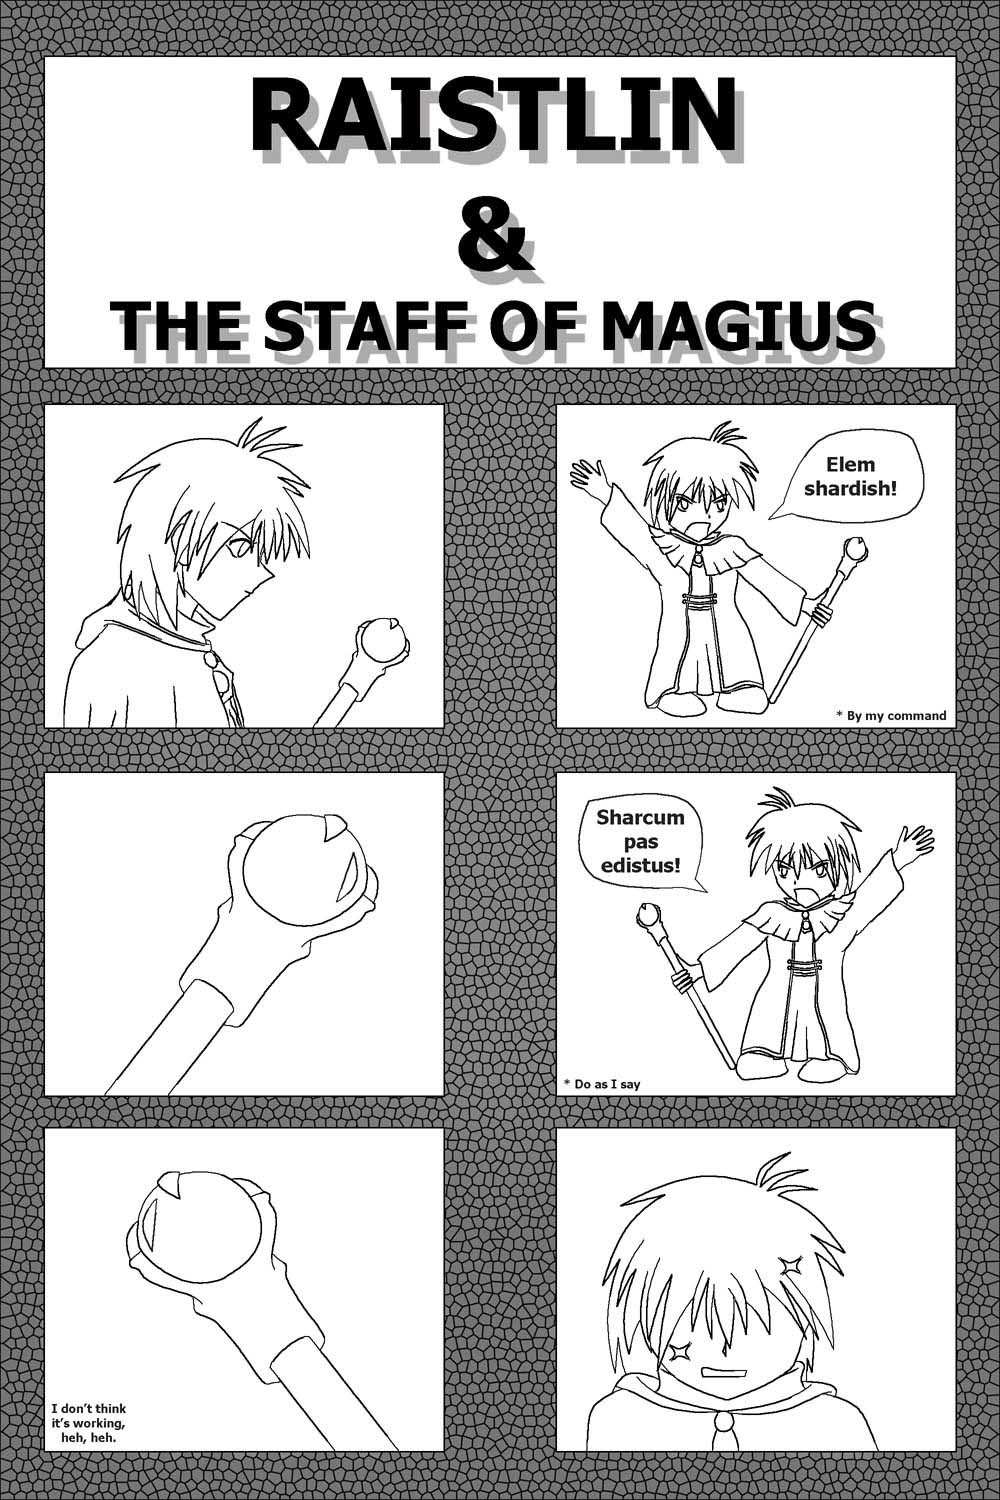 The Staff of Magius pg 1 by emerald_fire2065